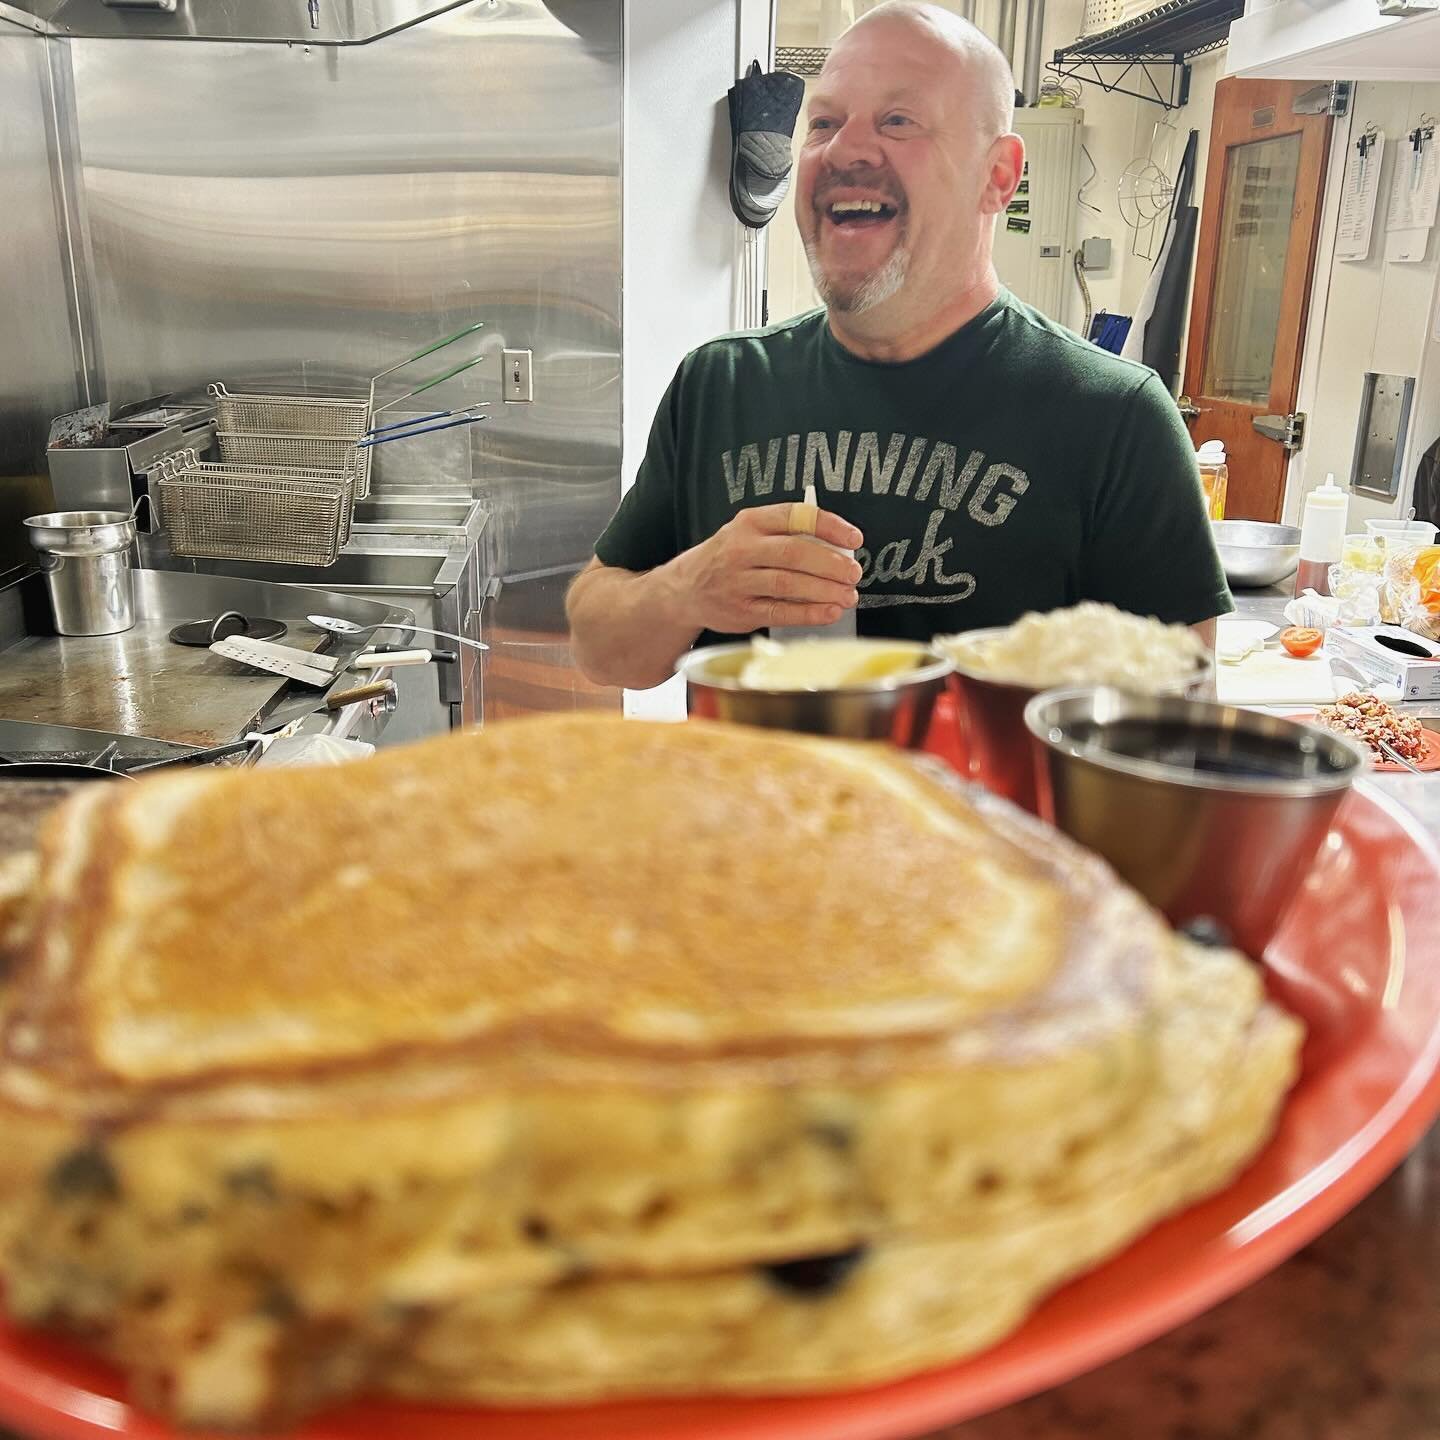 FRIDAY! Eggs Benedict w/ @colbywoodscattle eggs &amp; Canadian bacon? Or Scott&rsquo;s Sourdough Pancakes w/ Maine Wild Blueberries &amp; @mainegrains Maine-grown flour? Choose your own breakfast adventure! 
🌿🌿🌿
Serving breakfast 7-10:45 and Lunch